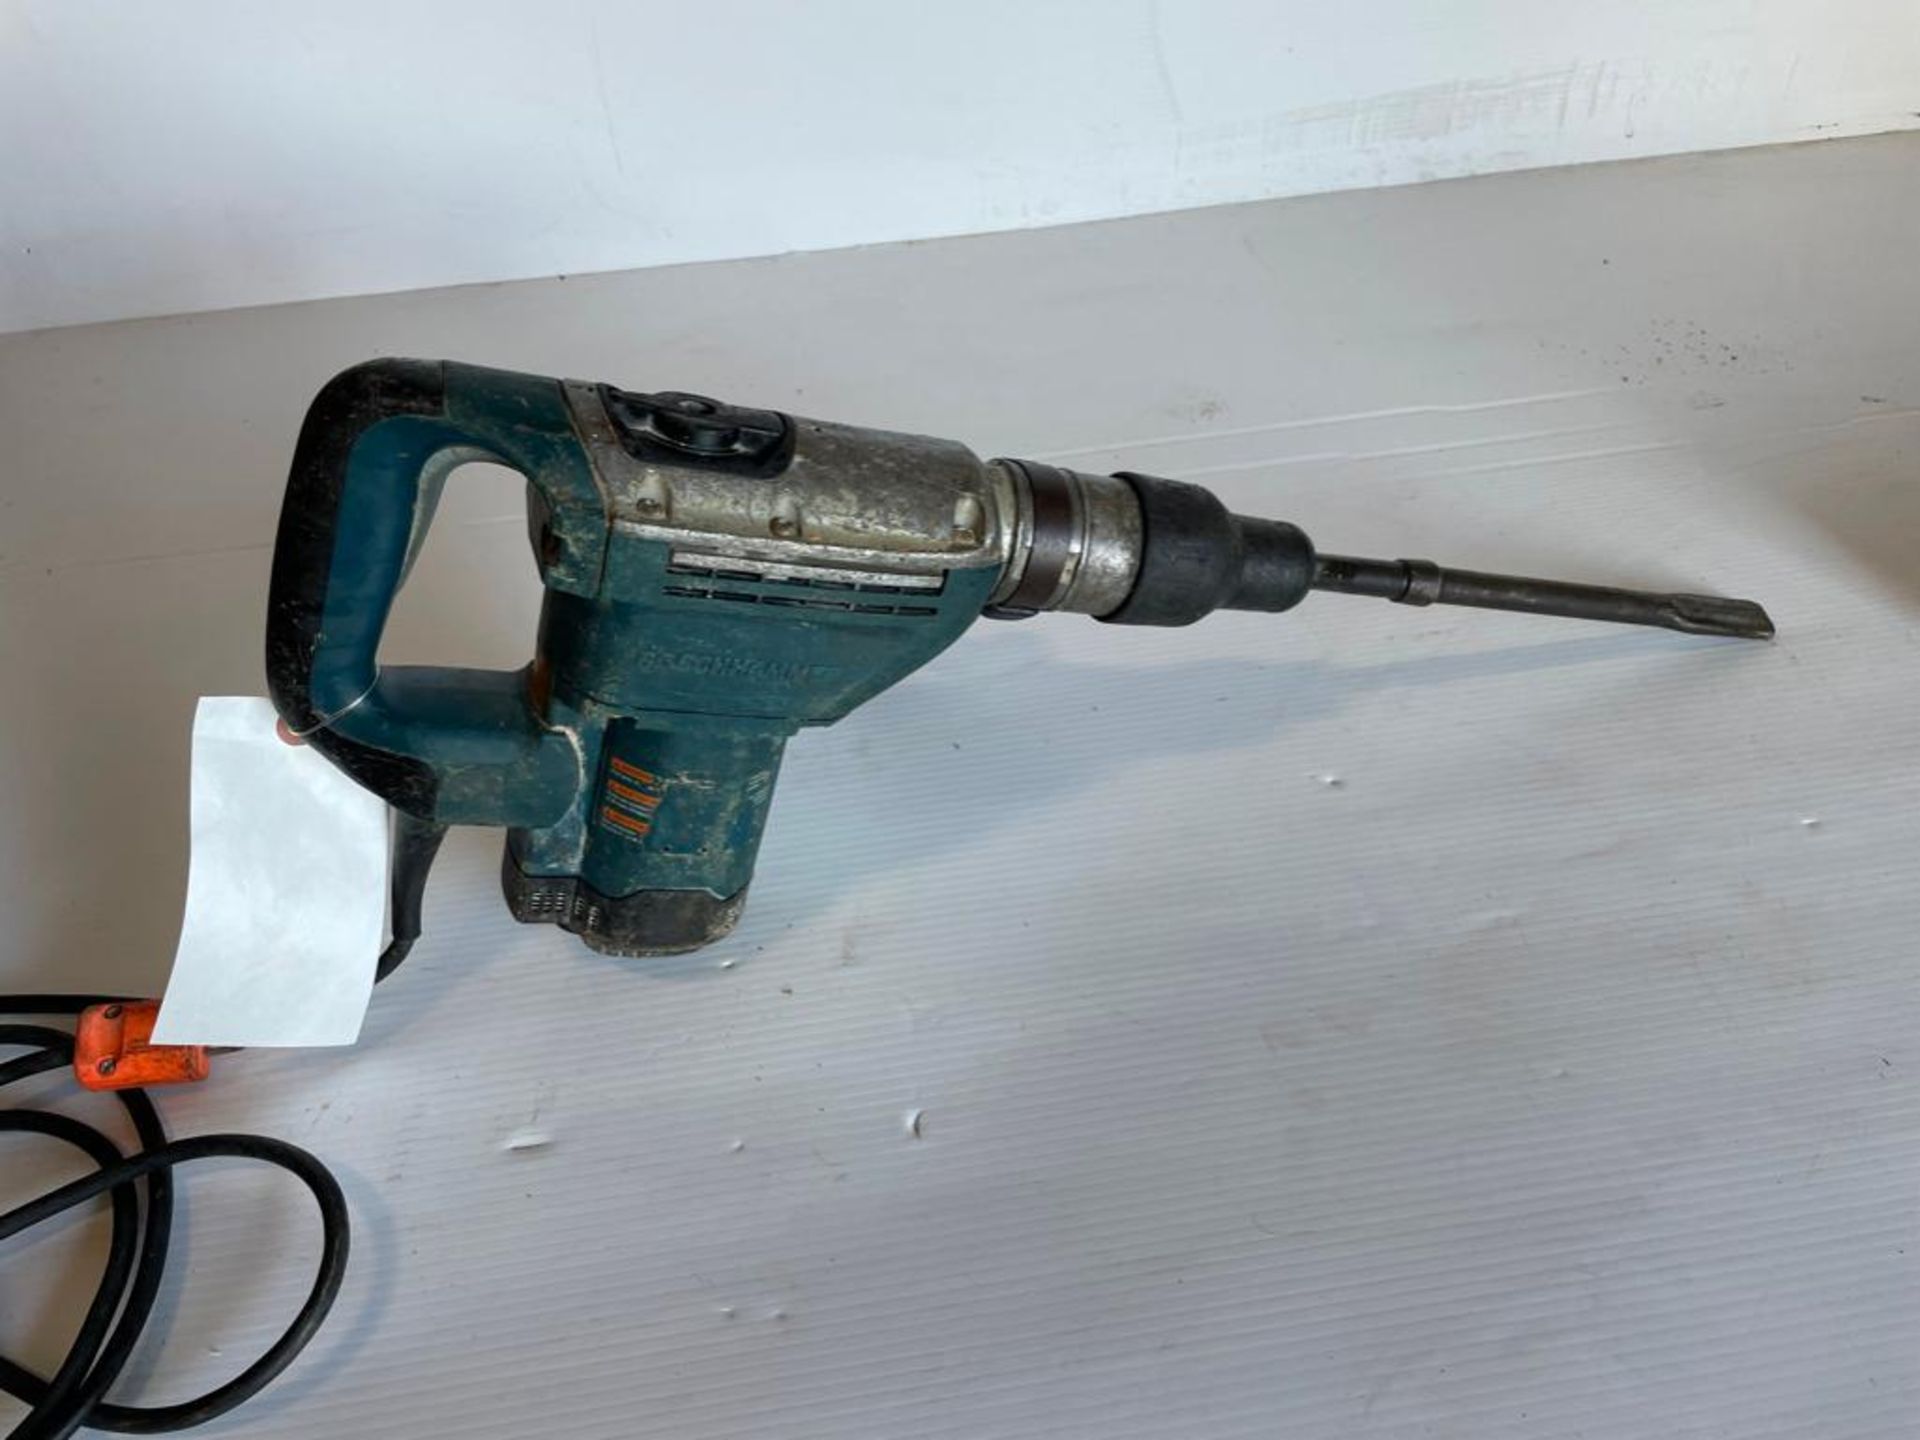 Bosch 11240 Hammer Drill, 120V. Located in Hazelwood, MO - Image 2 of 6